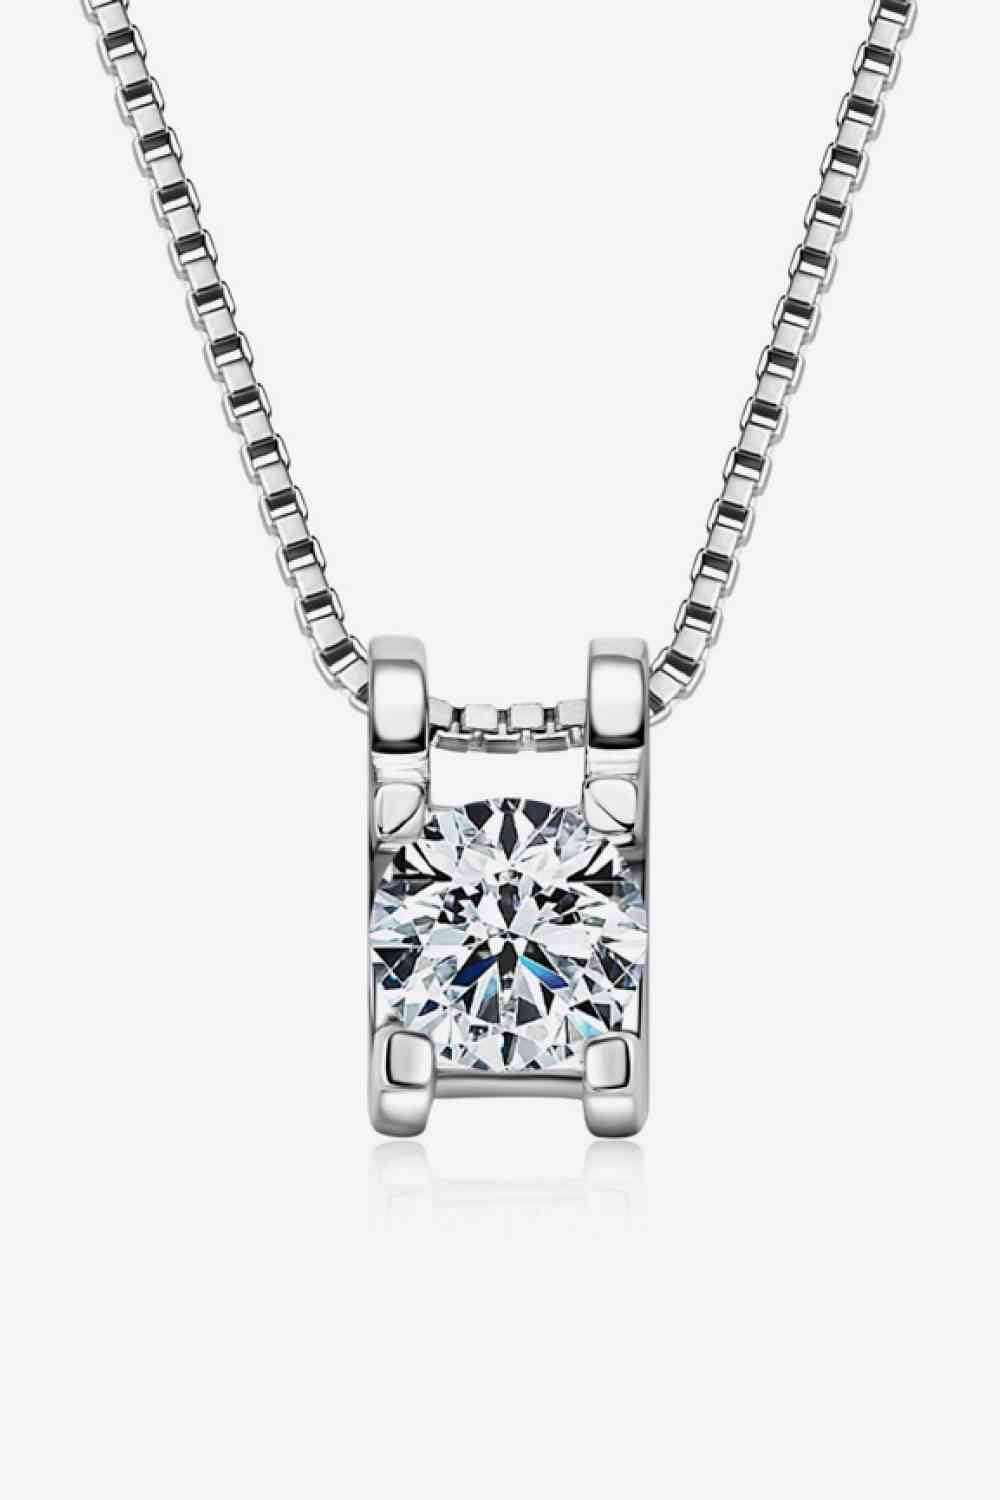 Moissanite 925 Sterling Silver Necklace - Necklace - Wild Willows Boutique - Massapequa, NY, affordable and fashionable clothing for women of all ages. Bottoms, tops, dresses, intimates, outerwear, sweater, shoes, accessories, jewelry, active wear, and more // Wild Willow Boutique.